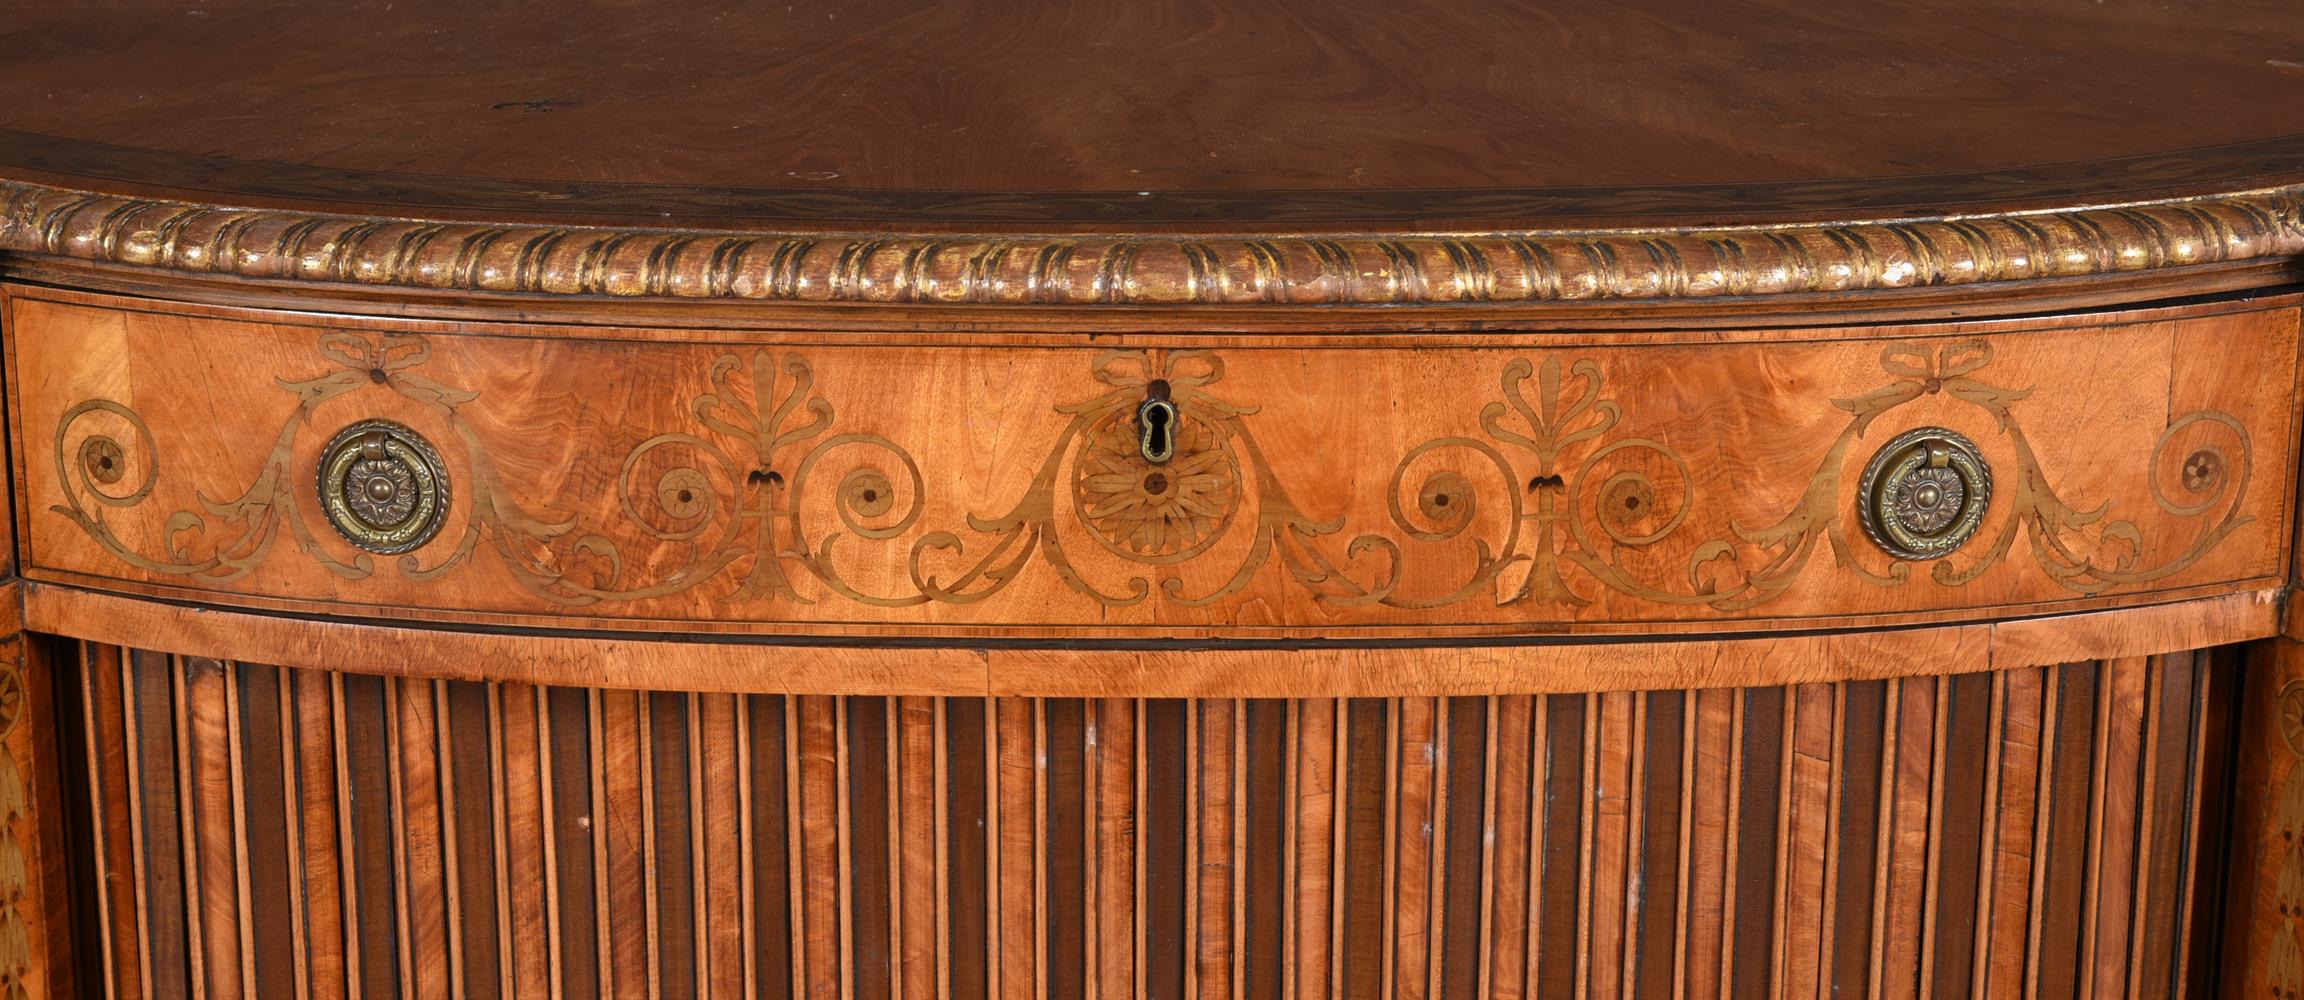 Y A SATINWOOD, NEOCLASSICAL MARQUETRY AND PARCEL GILT COMMODE OR SIDE CABINET, 19TH CENTURY - Image 5 of 8